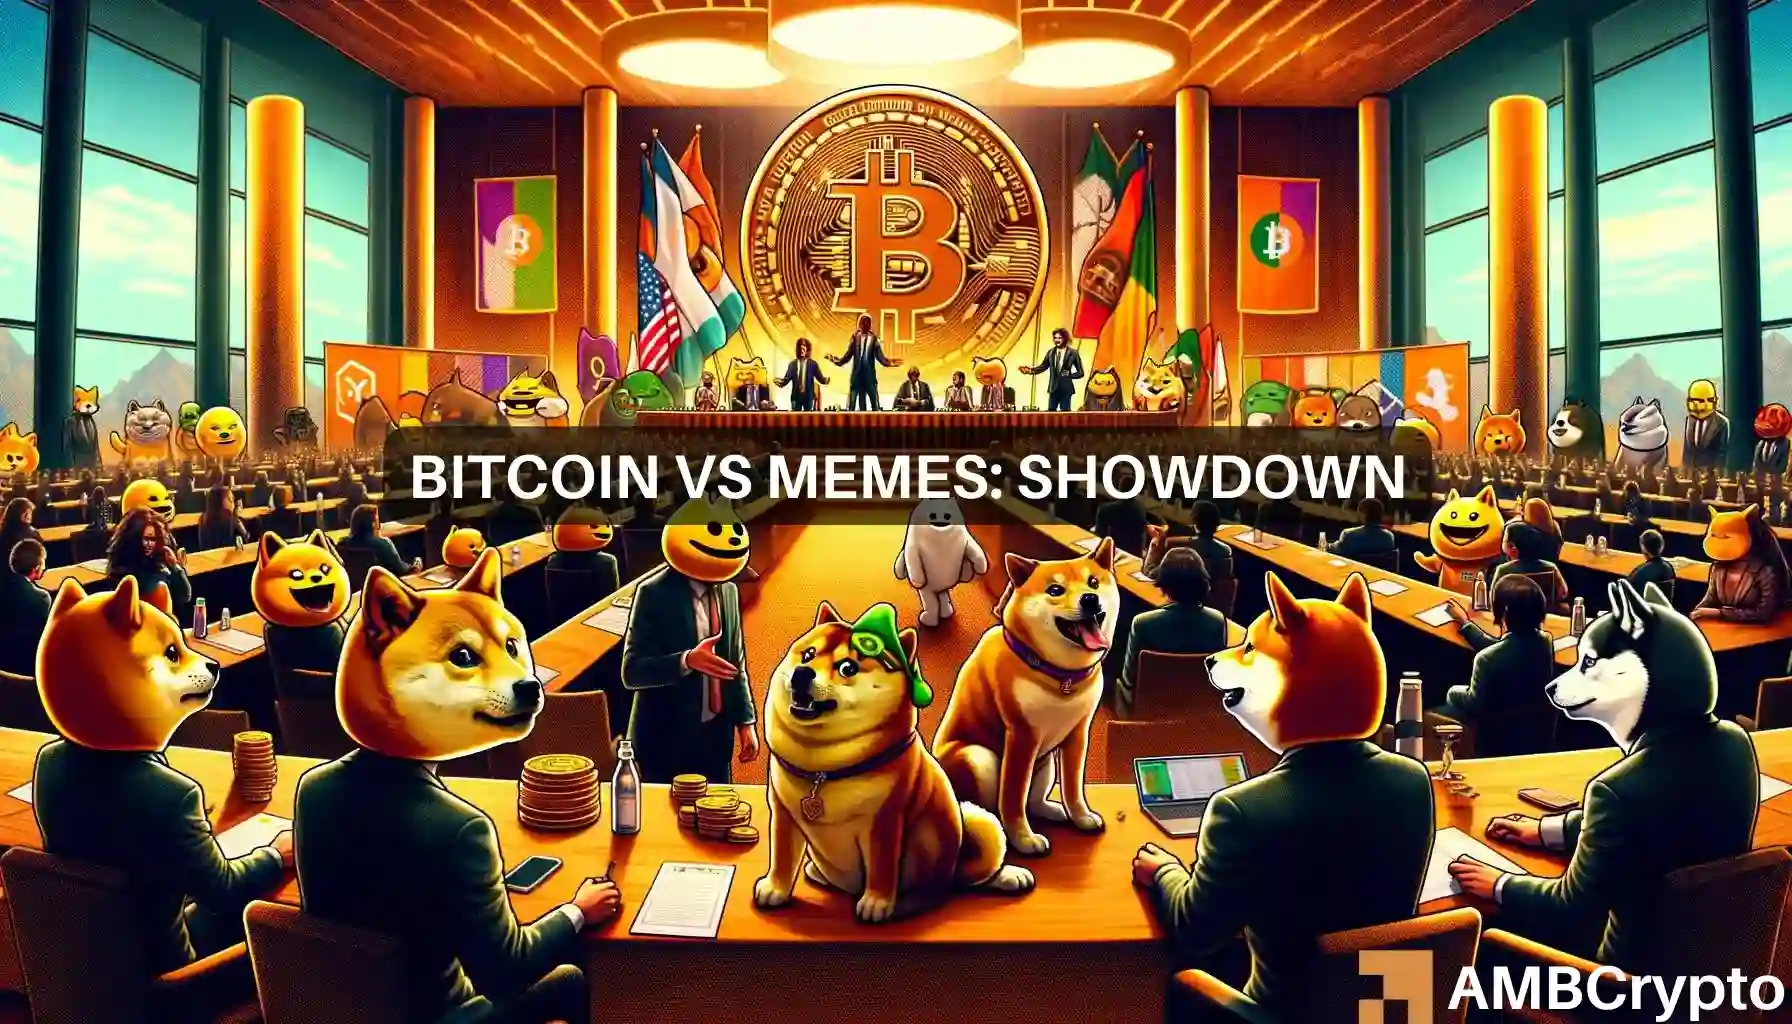 Memecoins outperform Bitcoin: Is the spotlight shifting?